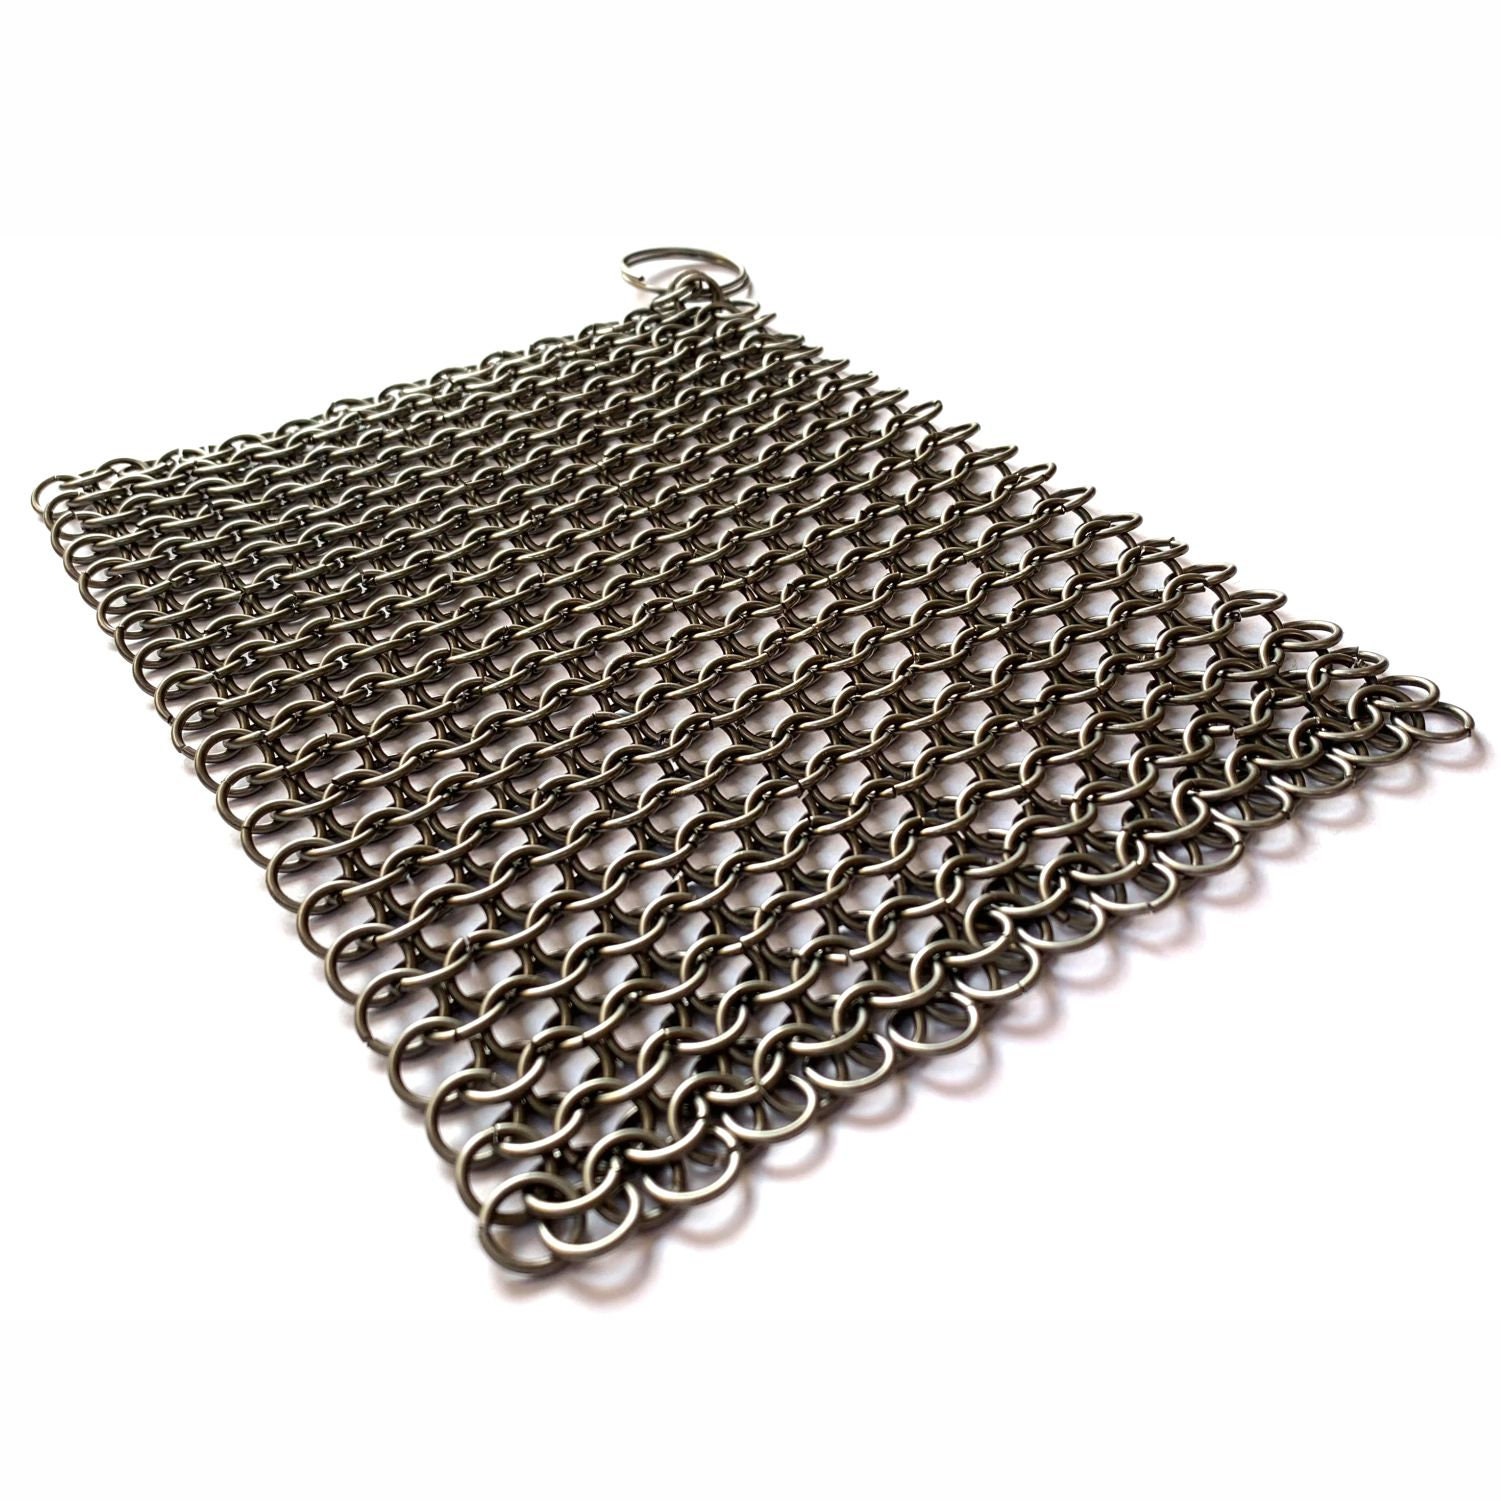 Cast Iron Cleaning Kit, 316 Stainless Steel Chainmail Scrubber, 2 Pan Grill Griddle Scrapers, Bamboo Fiber Rag, Sanding Sponge for Cast Iron Cleaner